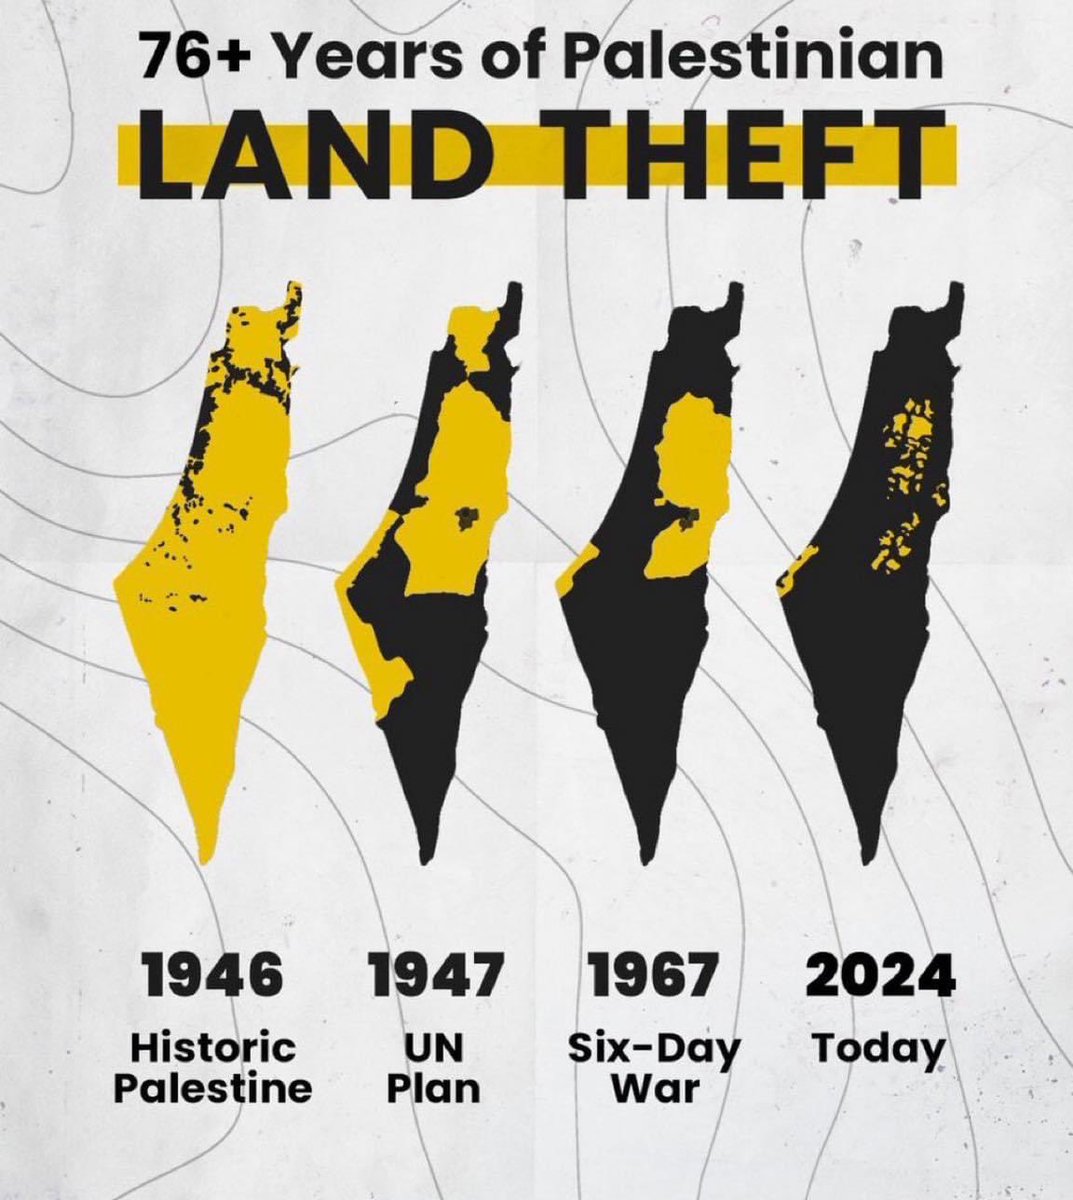 Yellow refers to Palestinians.. Prior to 1946, all the area was yellow except a very few number of black dots.. The UK facilitated relocation of Zionists to Palestine during the British occupation between 1922 and 1948.. It is completely disingenuous to consider Israeli